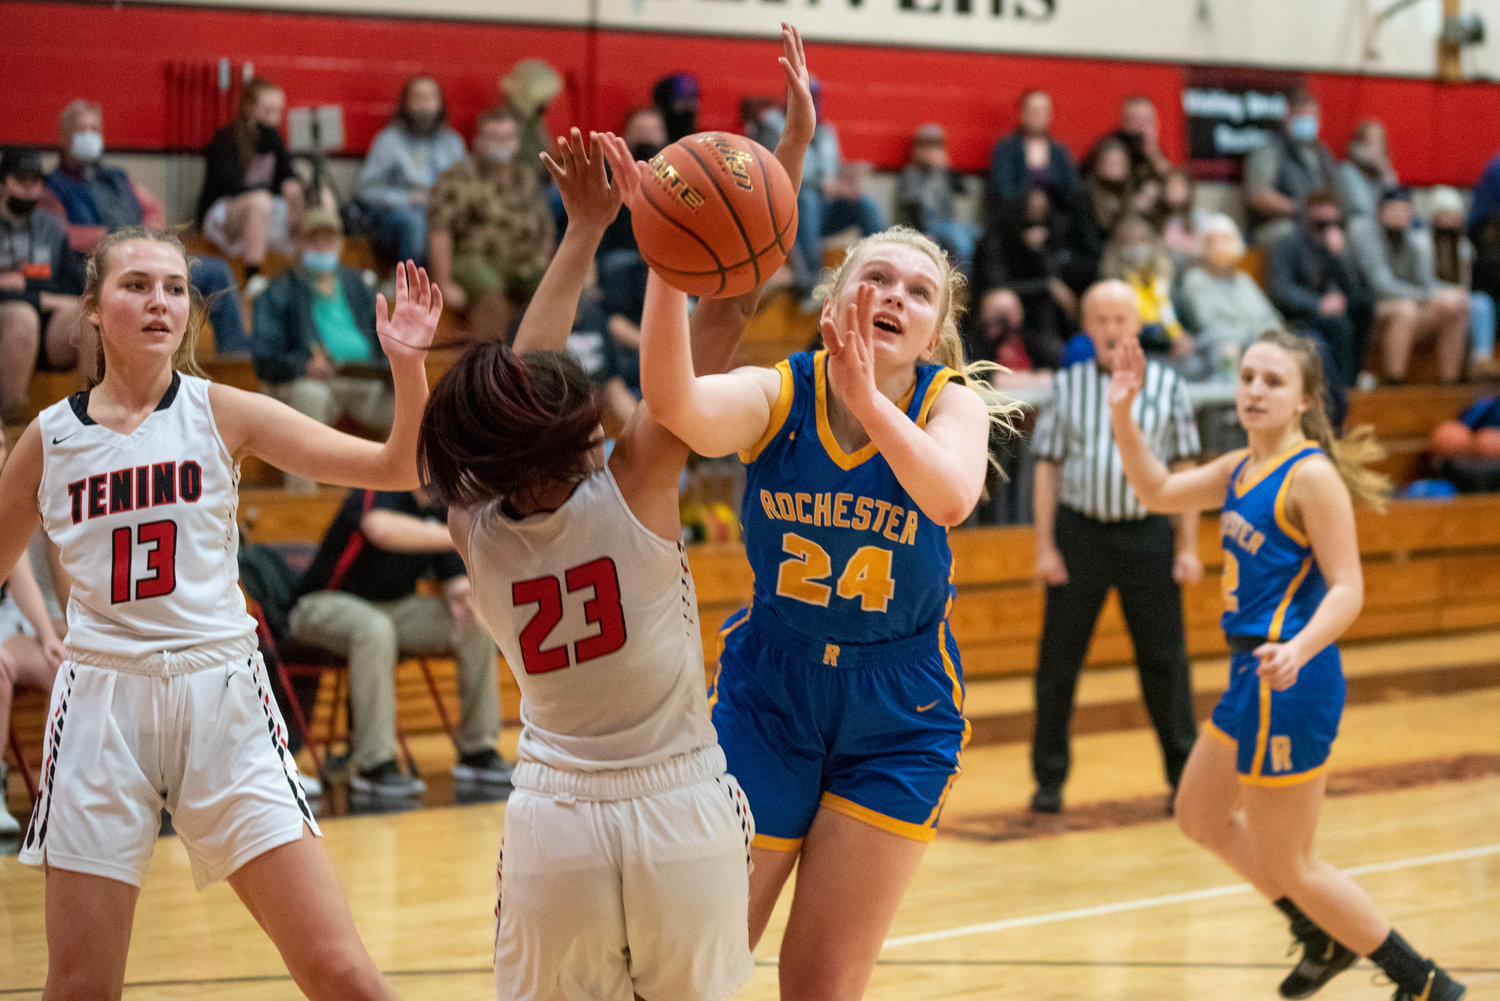 Rochester's Delany Winter (24) gets fouled shooting against Tenino on Dec. 2.